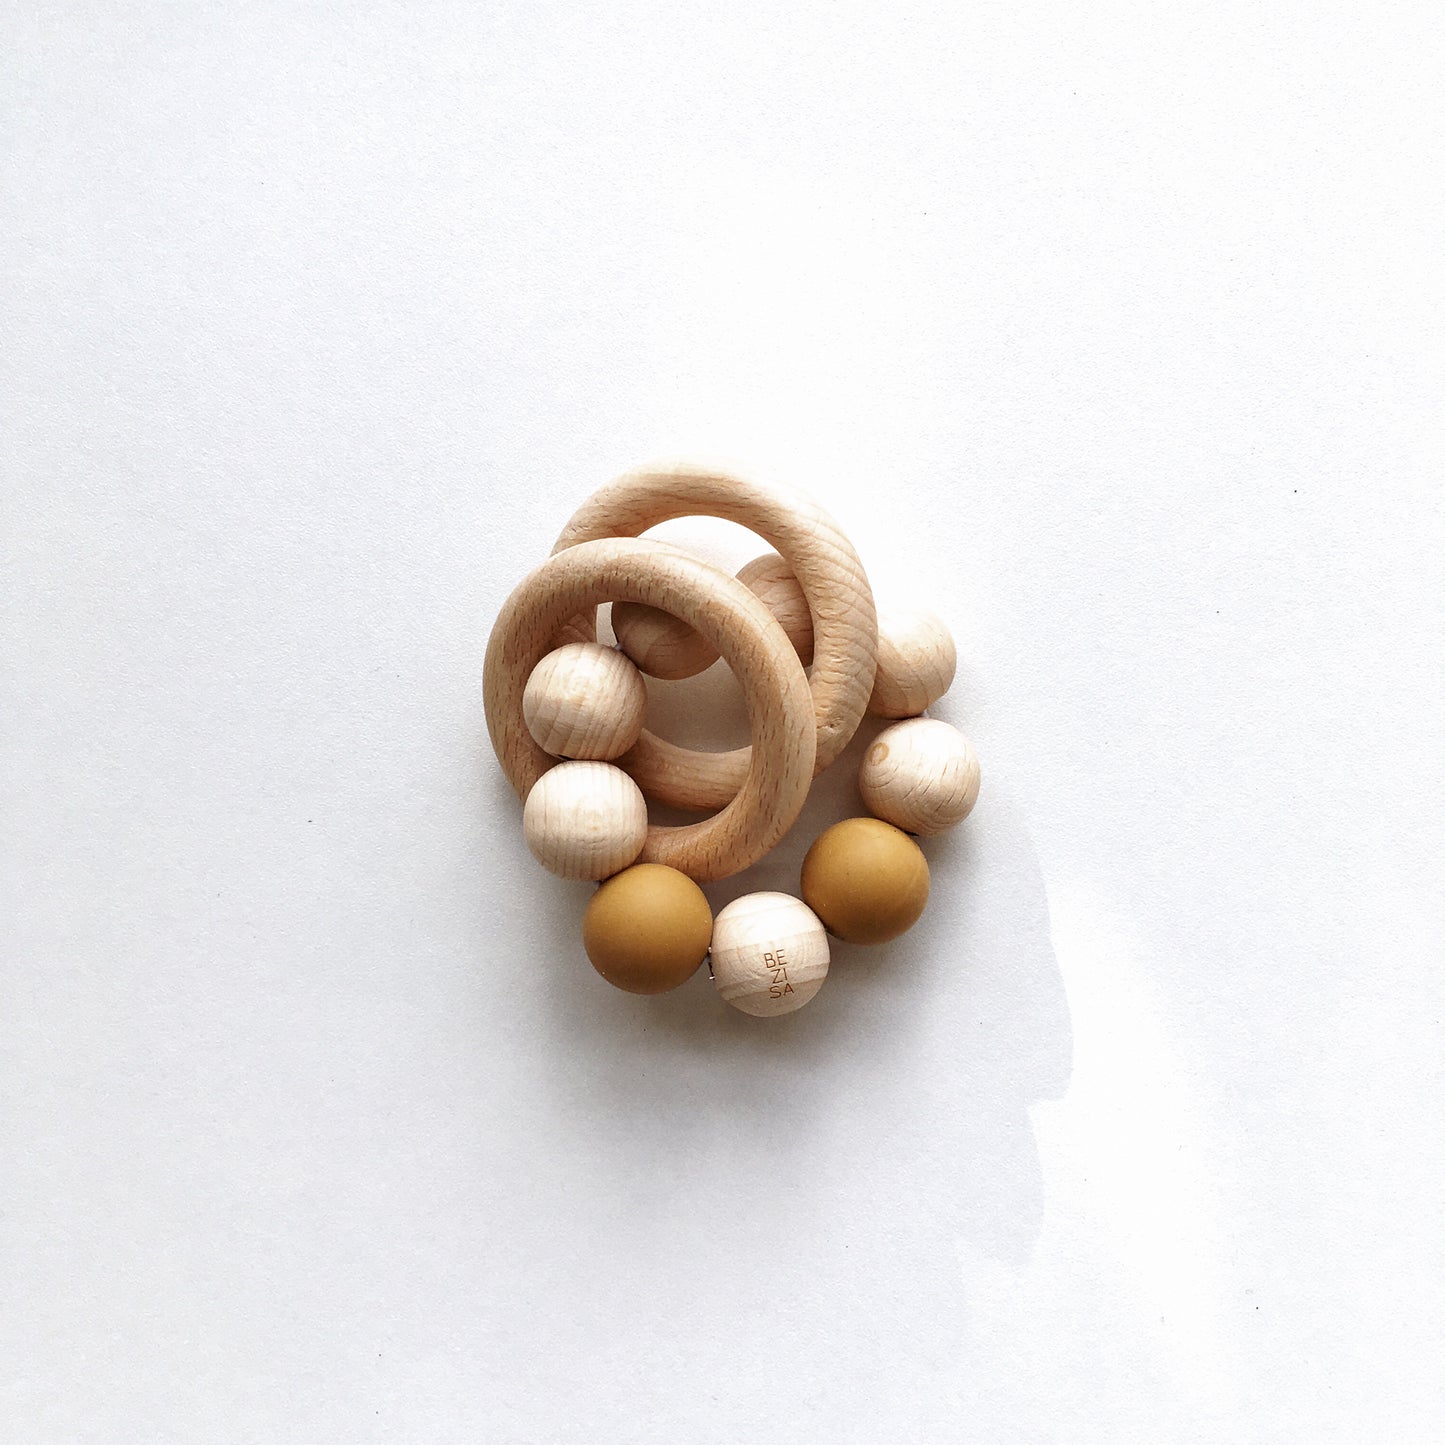 Bezisa wooden baby rattle with a mix of round wooden beads and camel coloured 100% silicone beads, plus two wooden rings. Product is photographed on a plain white background.